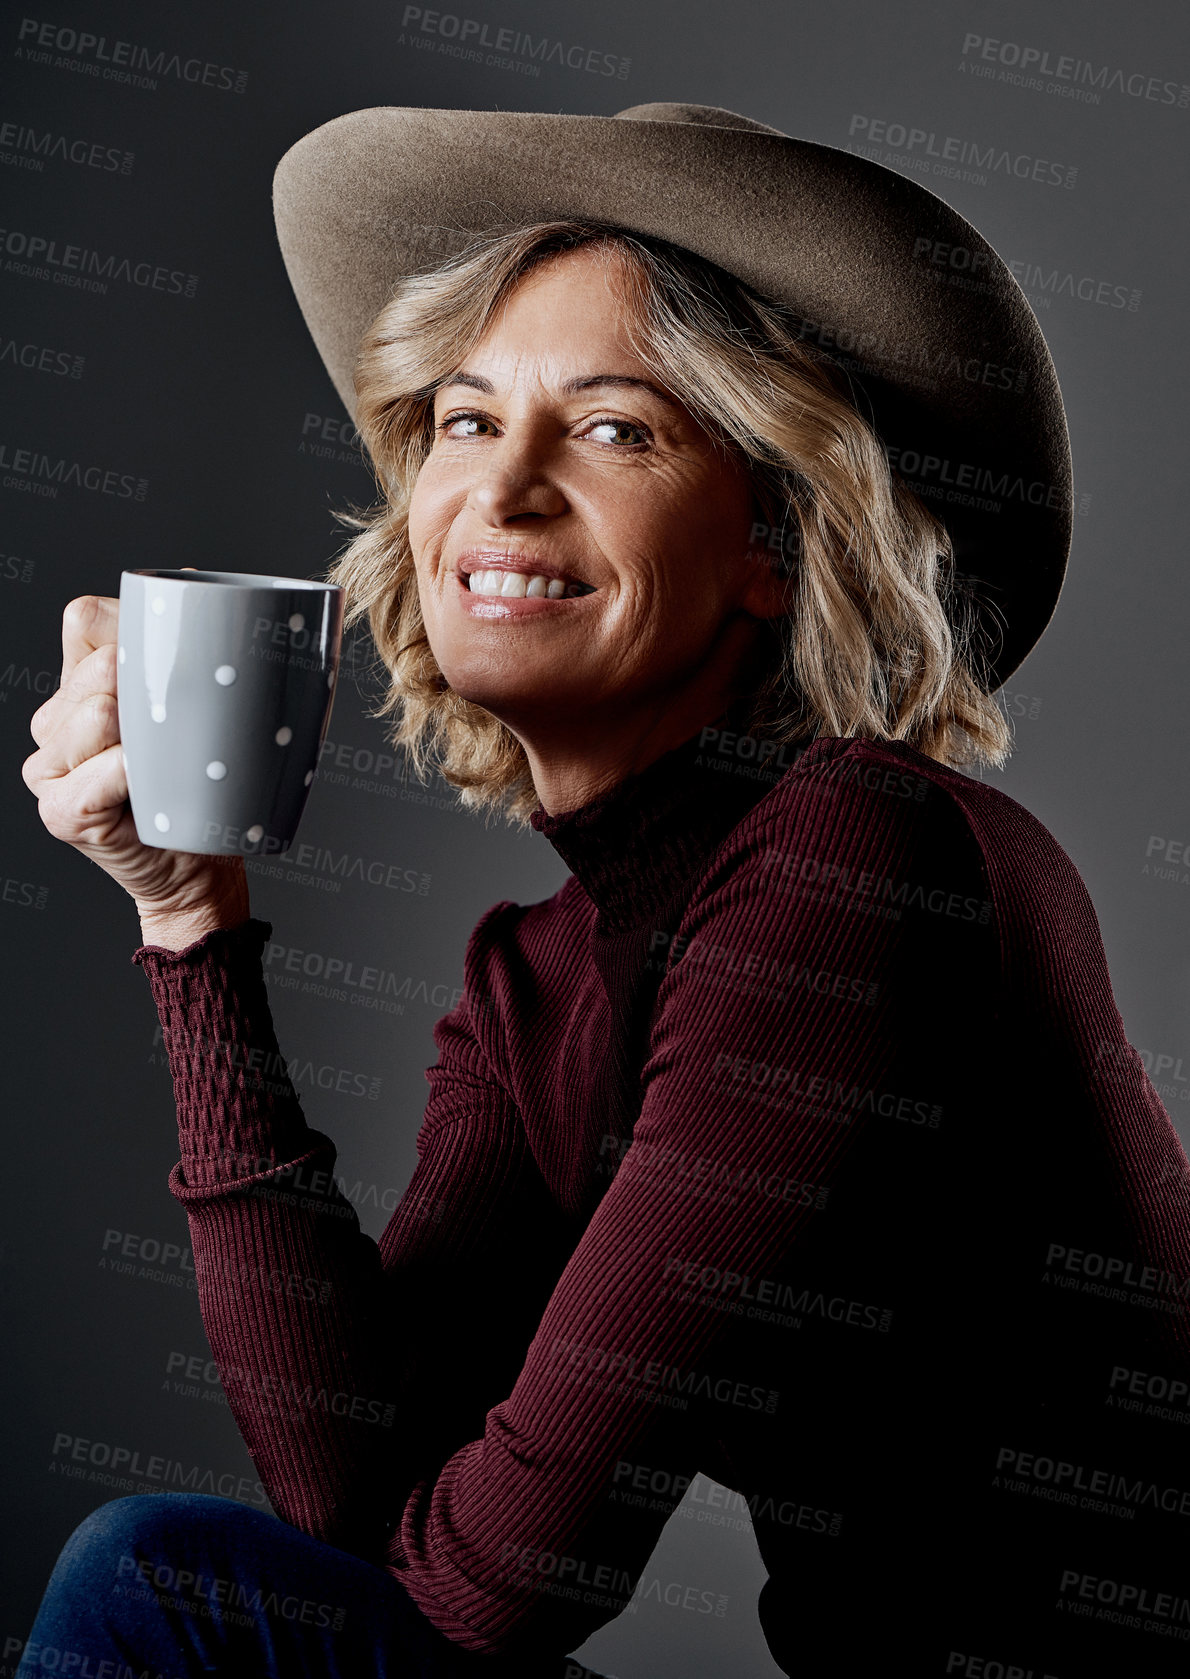 Buy stock photo Cropped shot of a mature woman looking stylish against a grey background